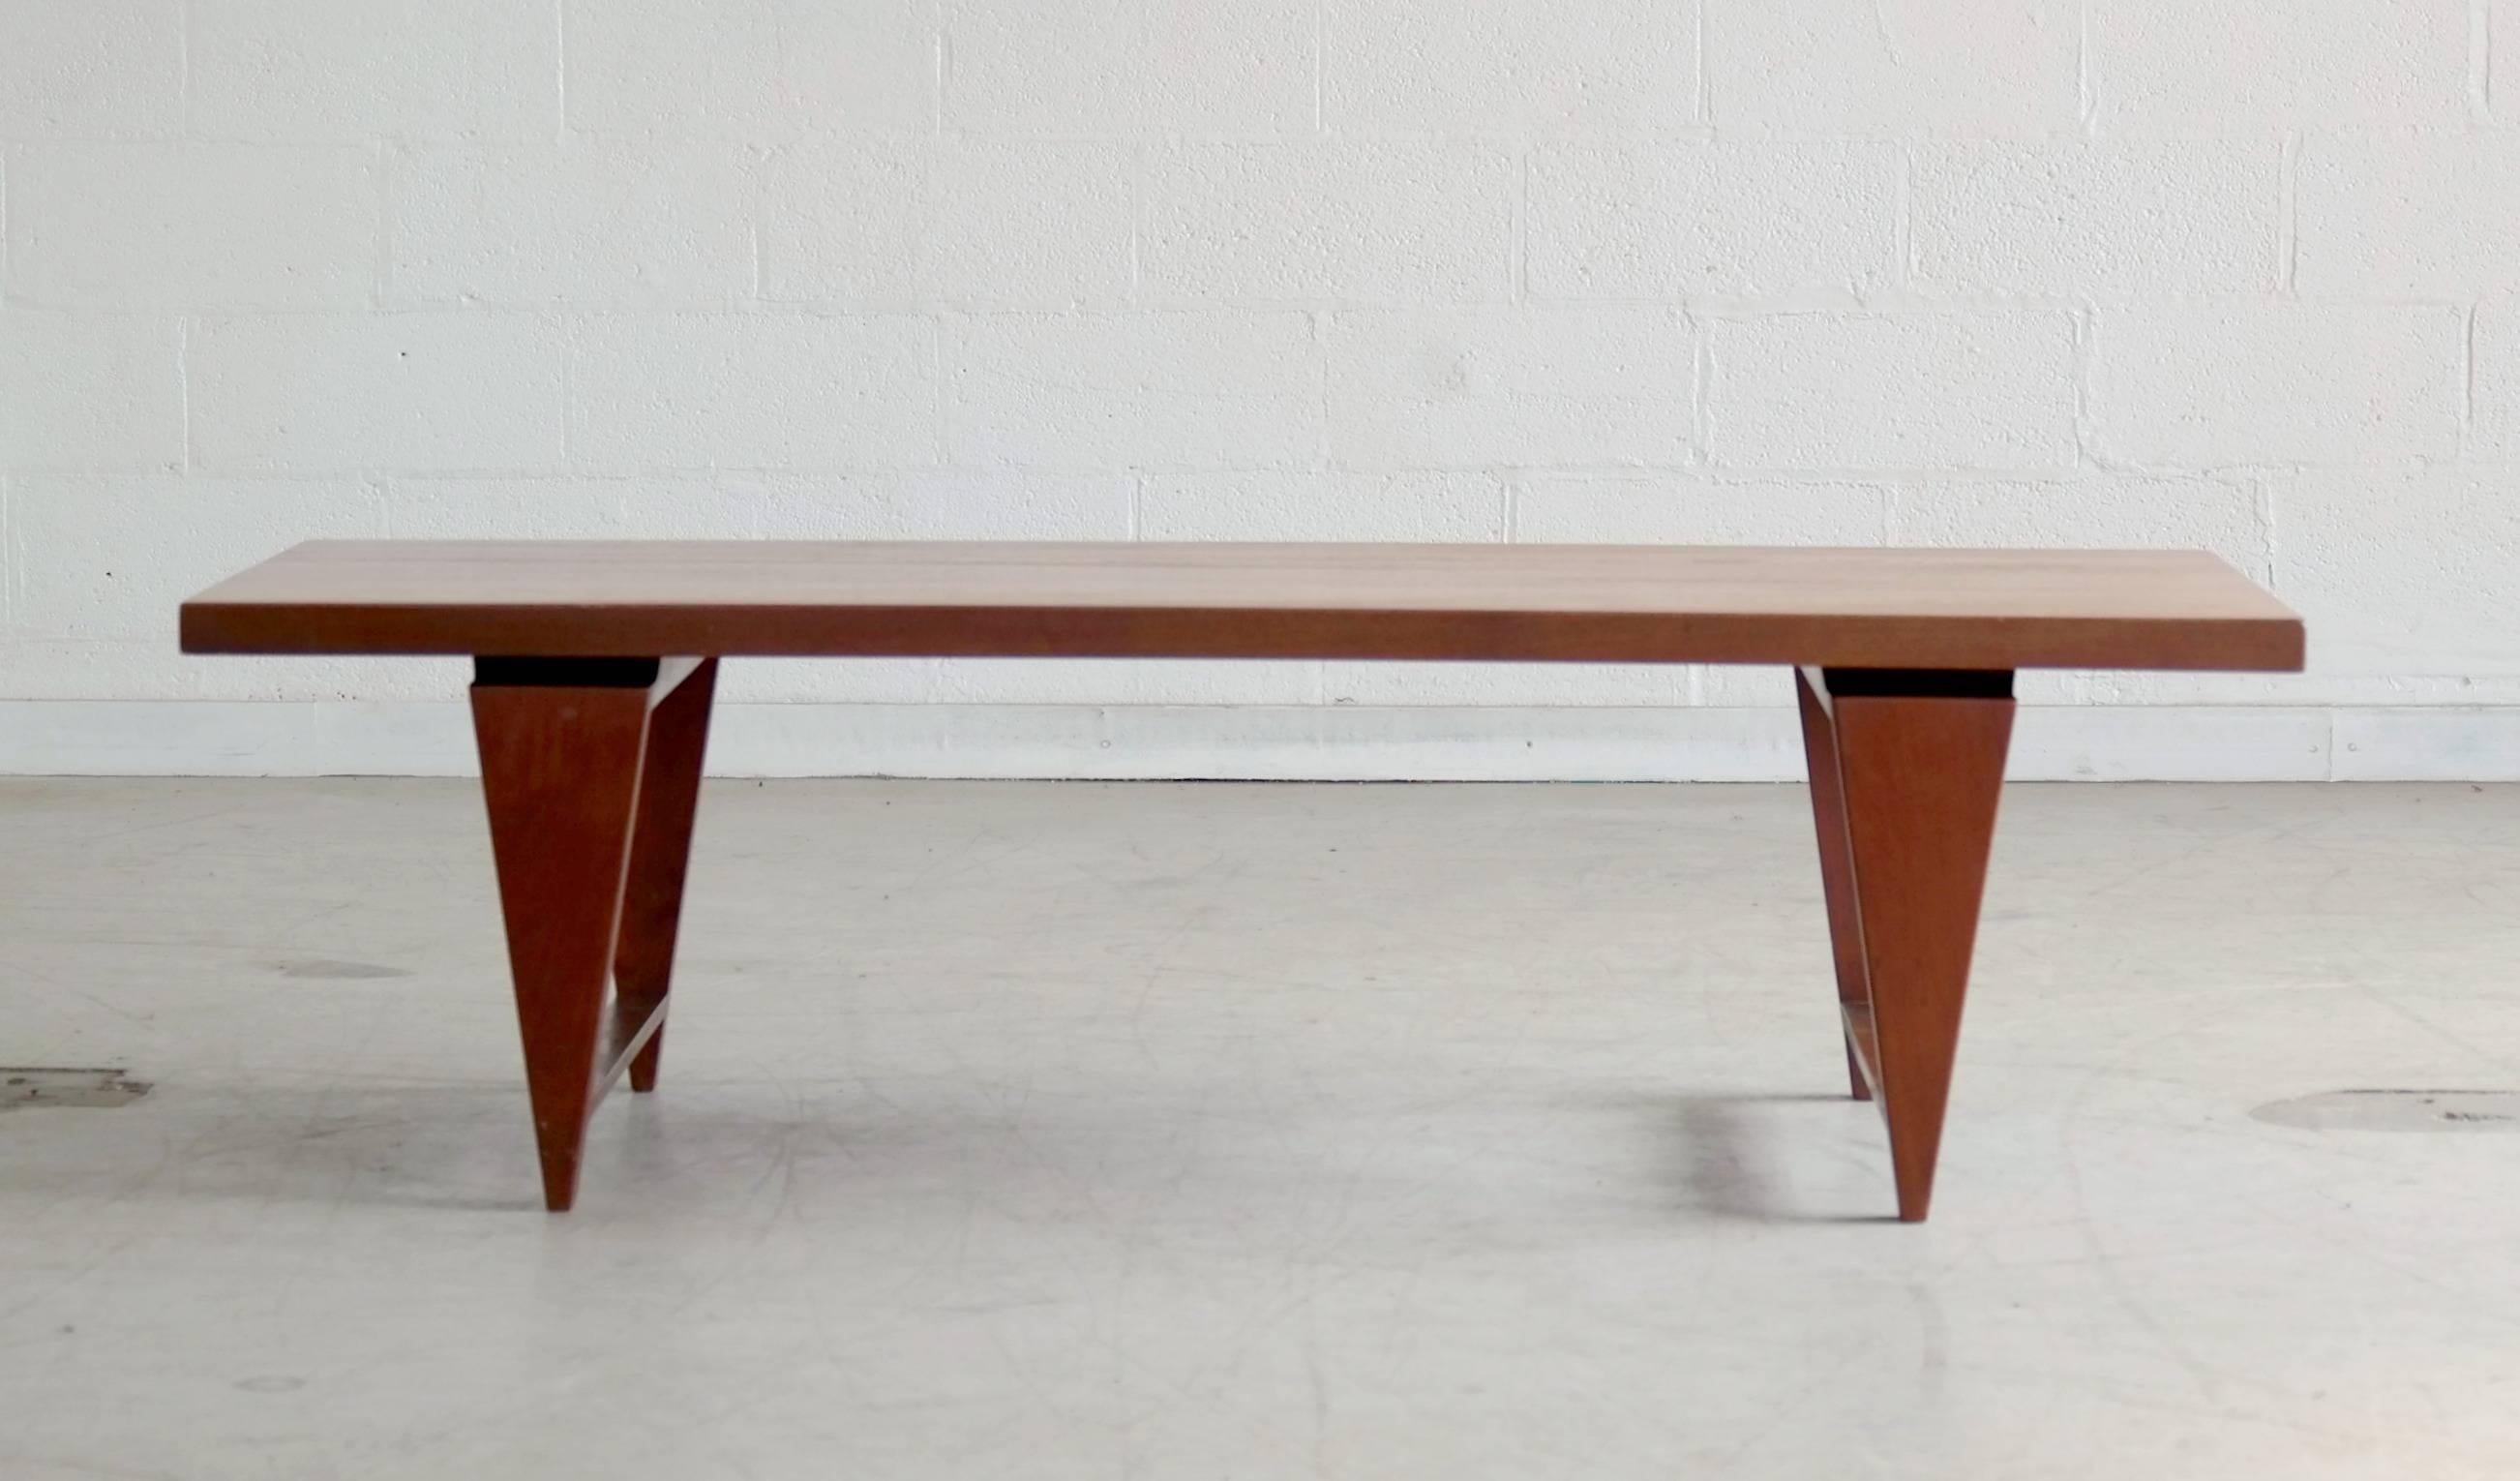 Coffee table by Illum Wikkelsø with distinctive triangular legs and floating top. In solid teak, this table has a strong, graceful presence with its rather solid upper resting almost tip-toeing on its four points.